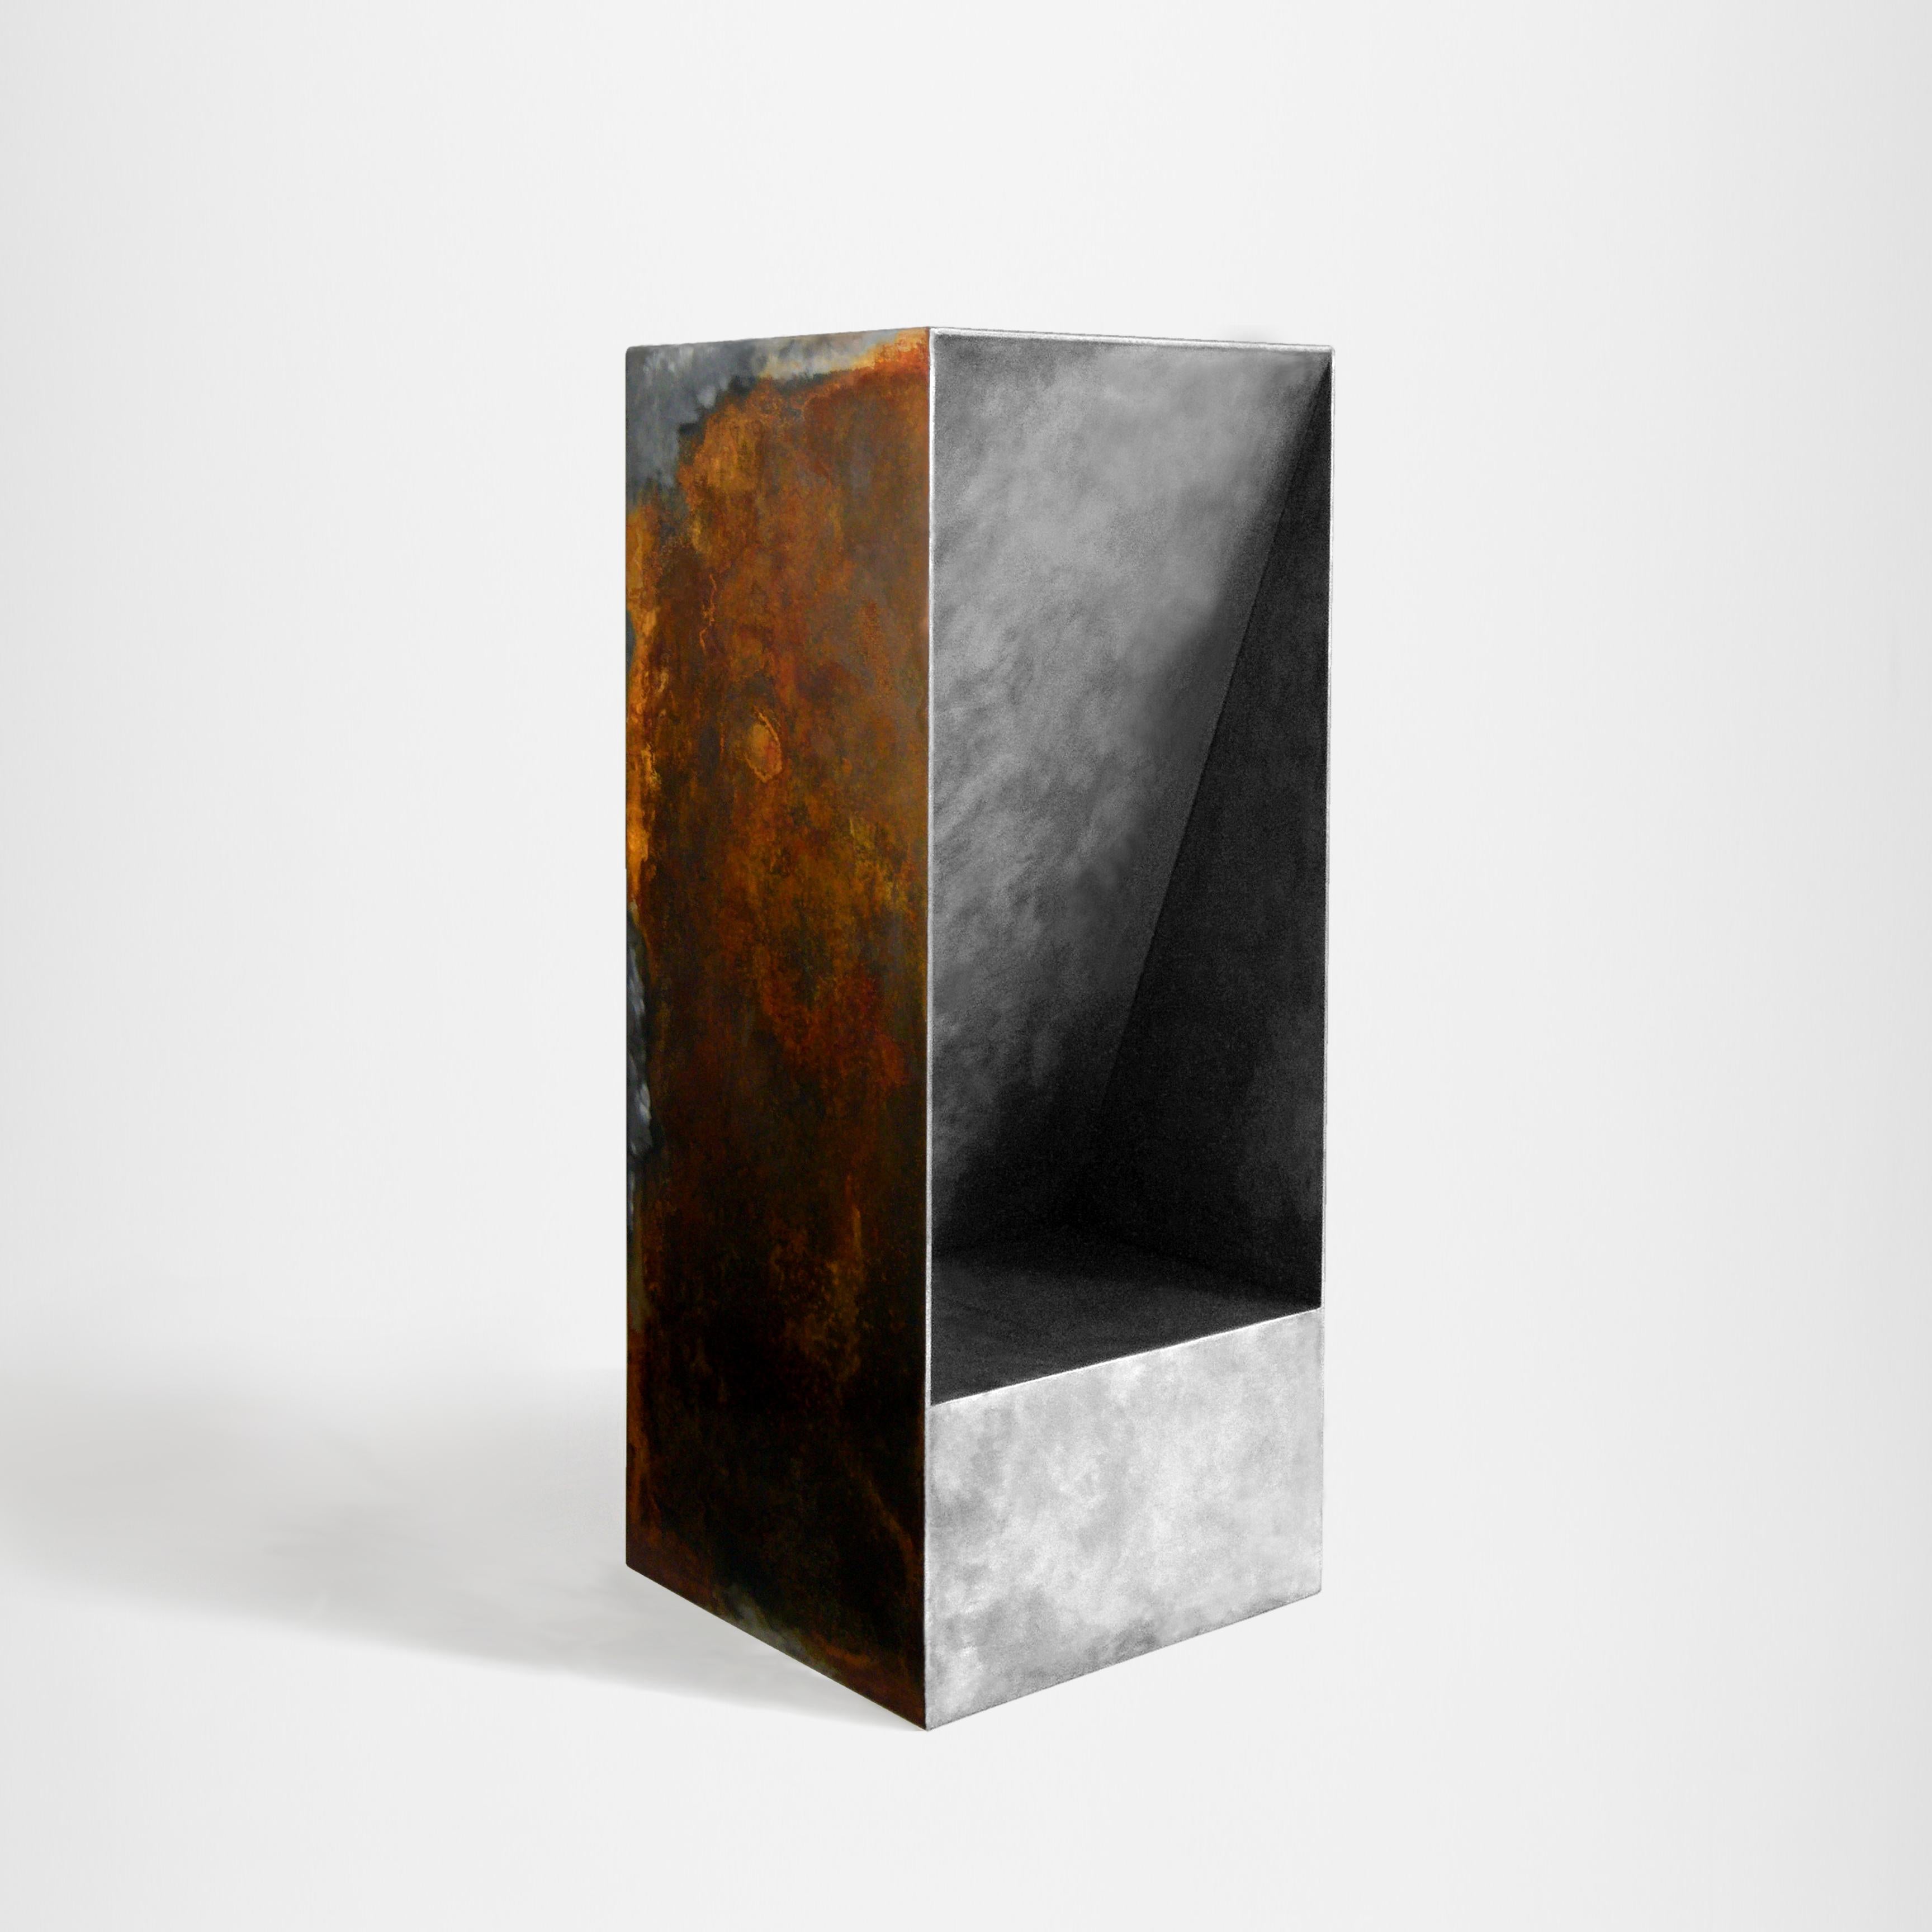 THE BOX Bar Stool by Baker Street Boys
Limited Edition of 50 + 3 AP
Dimensions: H 75 x W 30 x L 30 cm
Materials: Steel & Rust

INTRODUCTION THE BOX Collection is a set of sculptural objects representing the collaboration between the artists and the